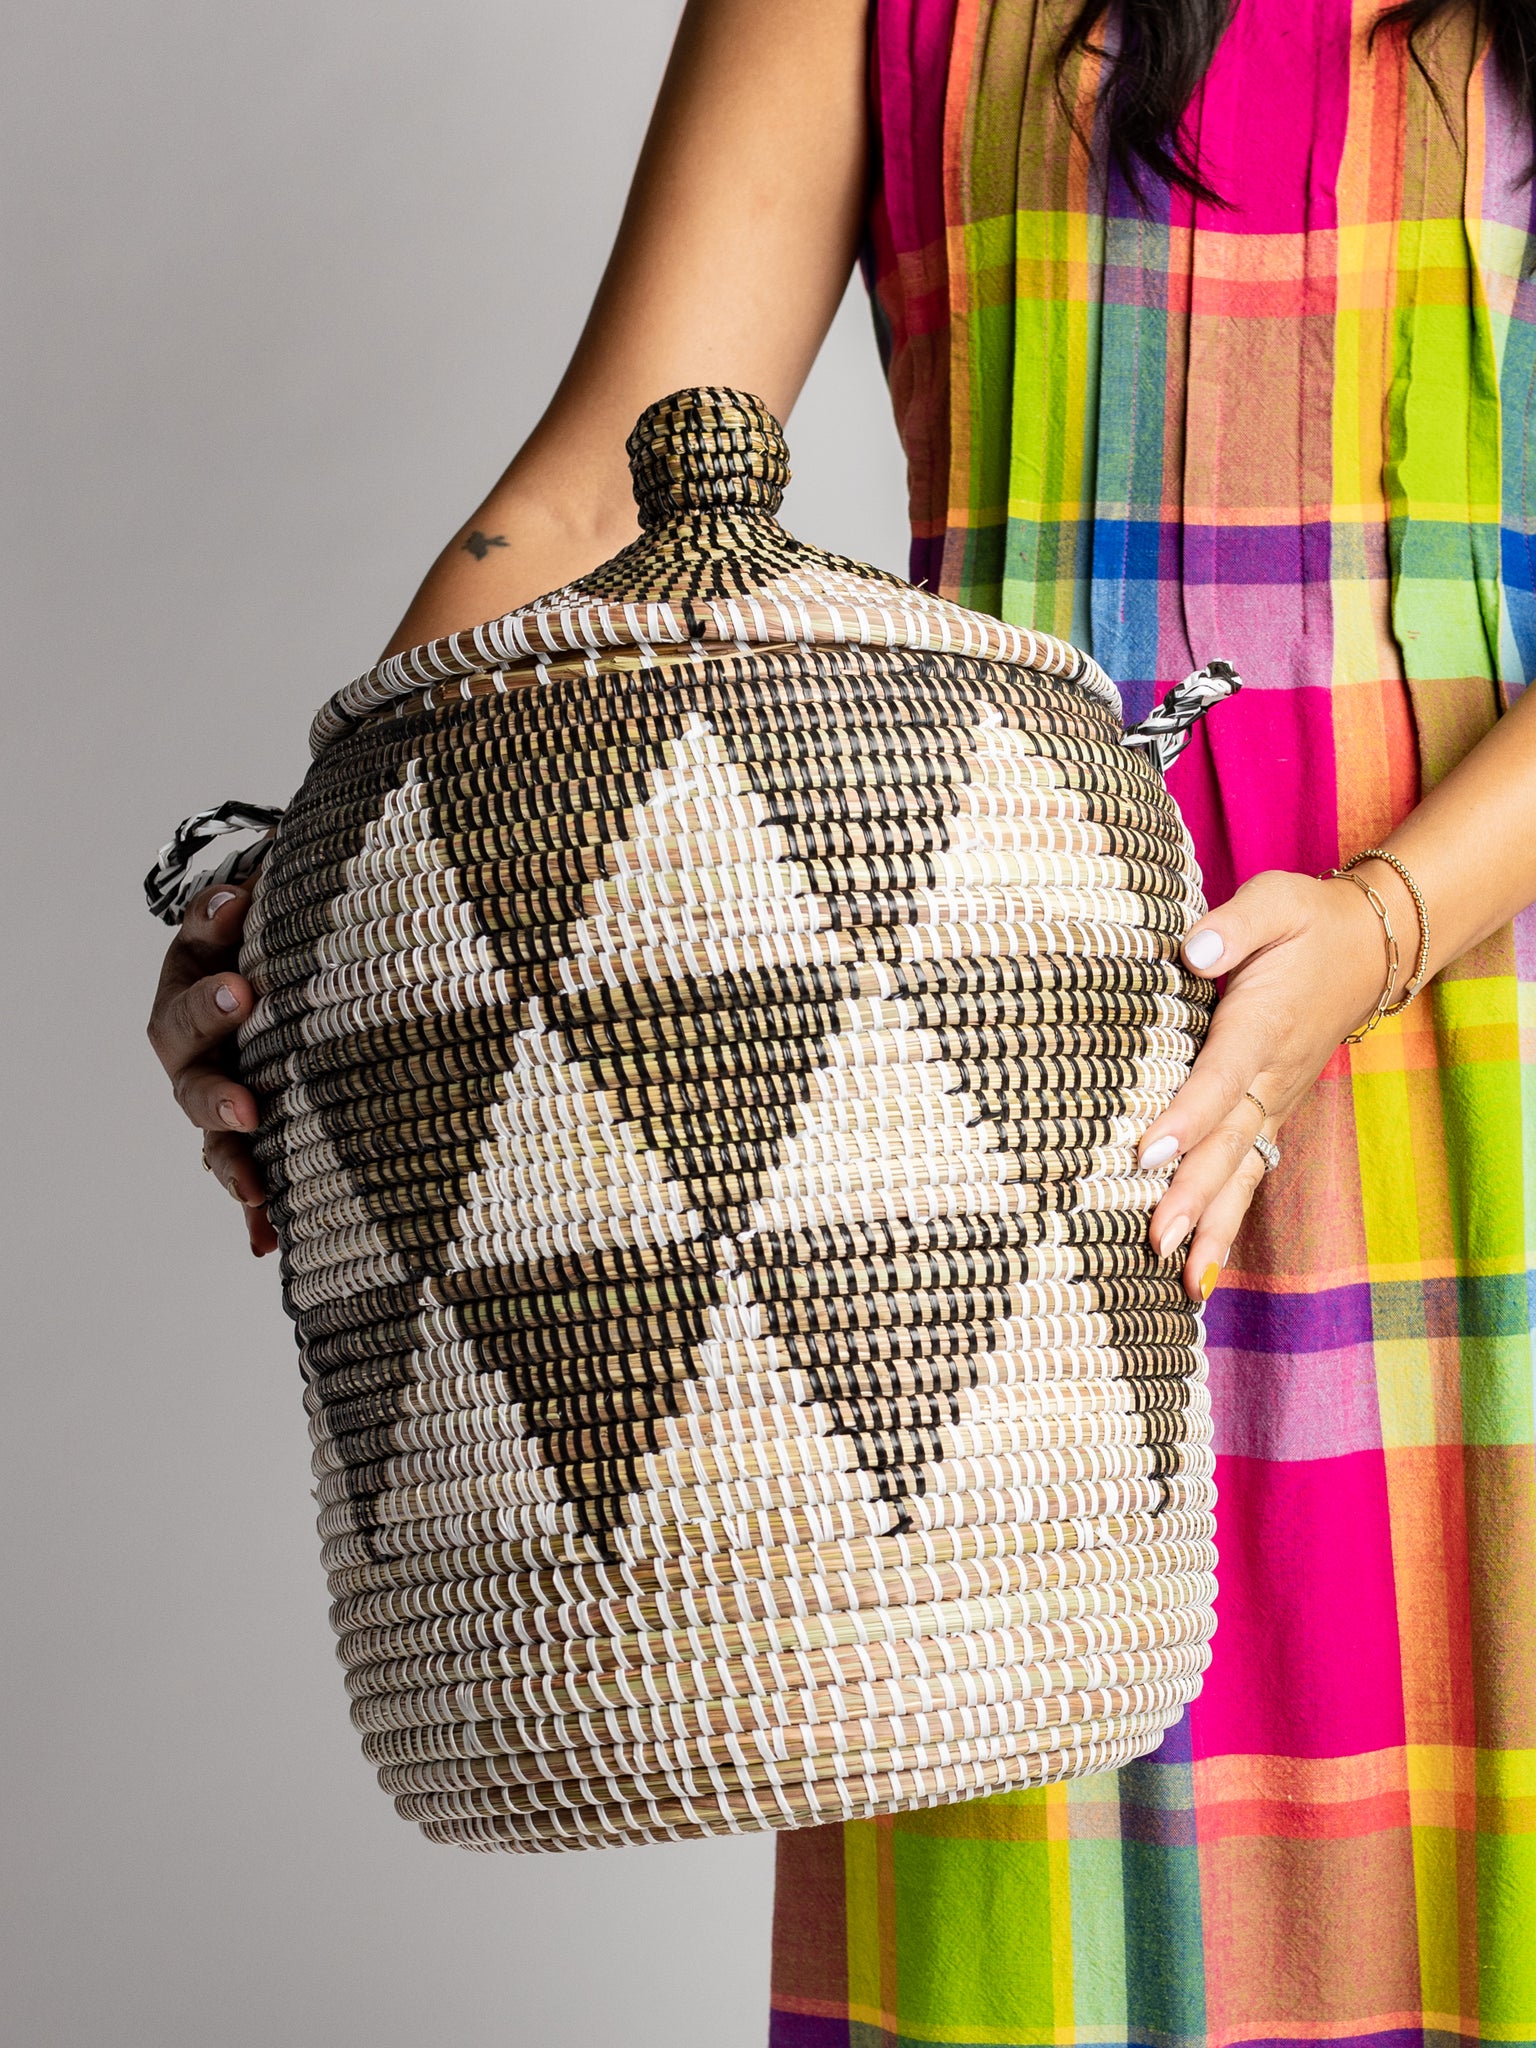 Basket - handwoven in West Africa with pattern, perfect for storage